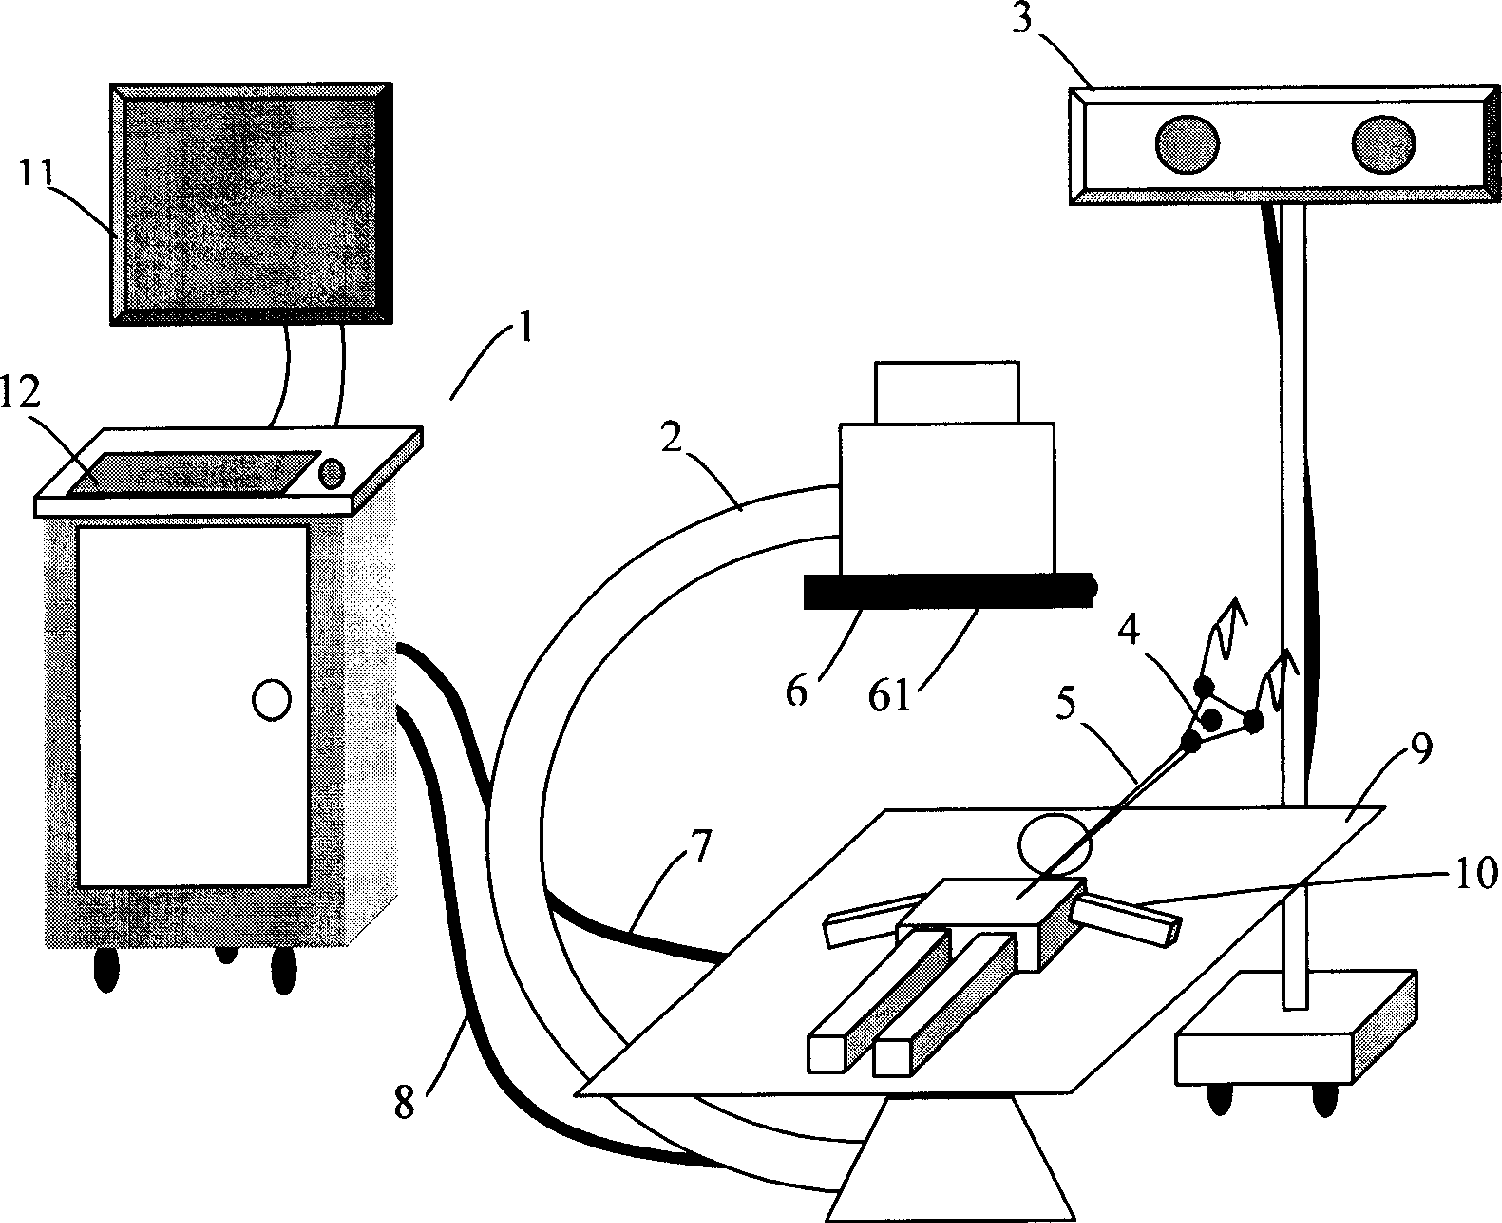 Puncture guiding system and method in computer aided percutaneous nephrostolithotomy